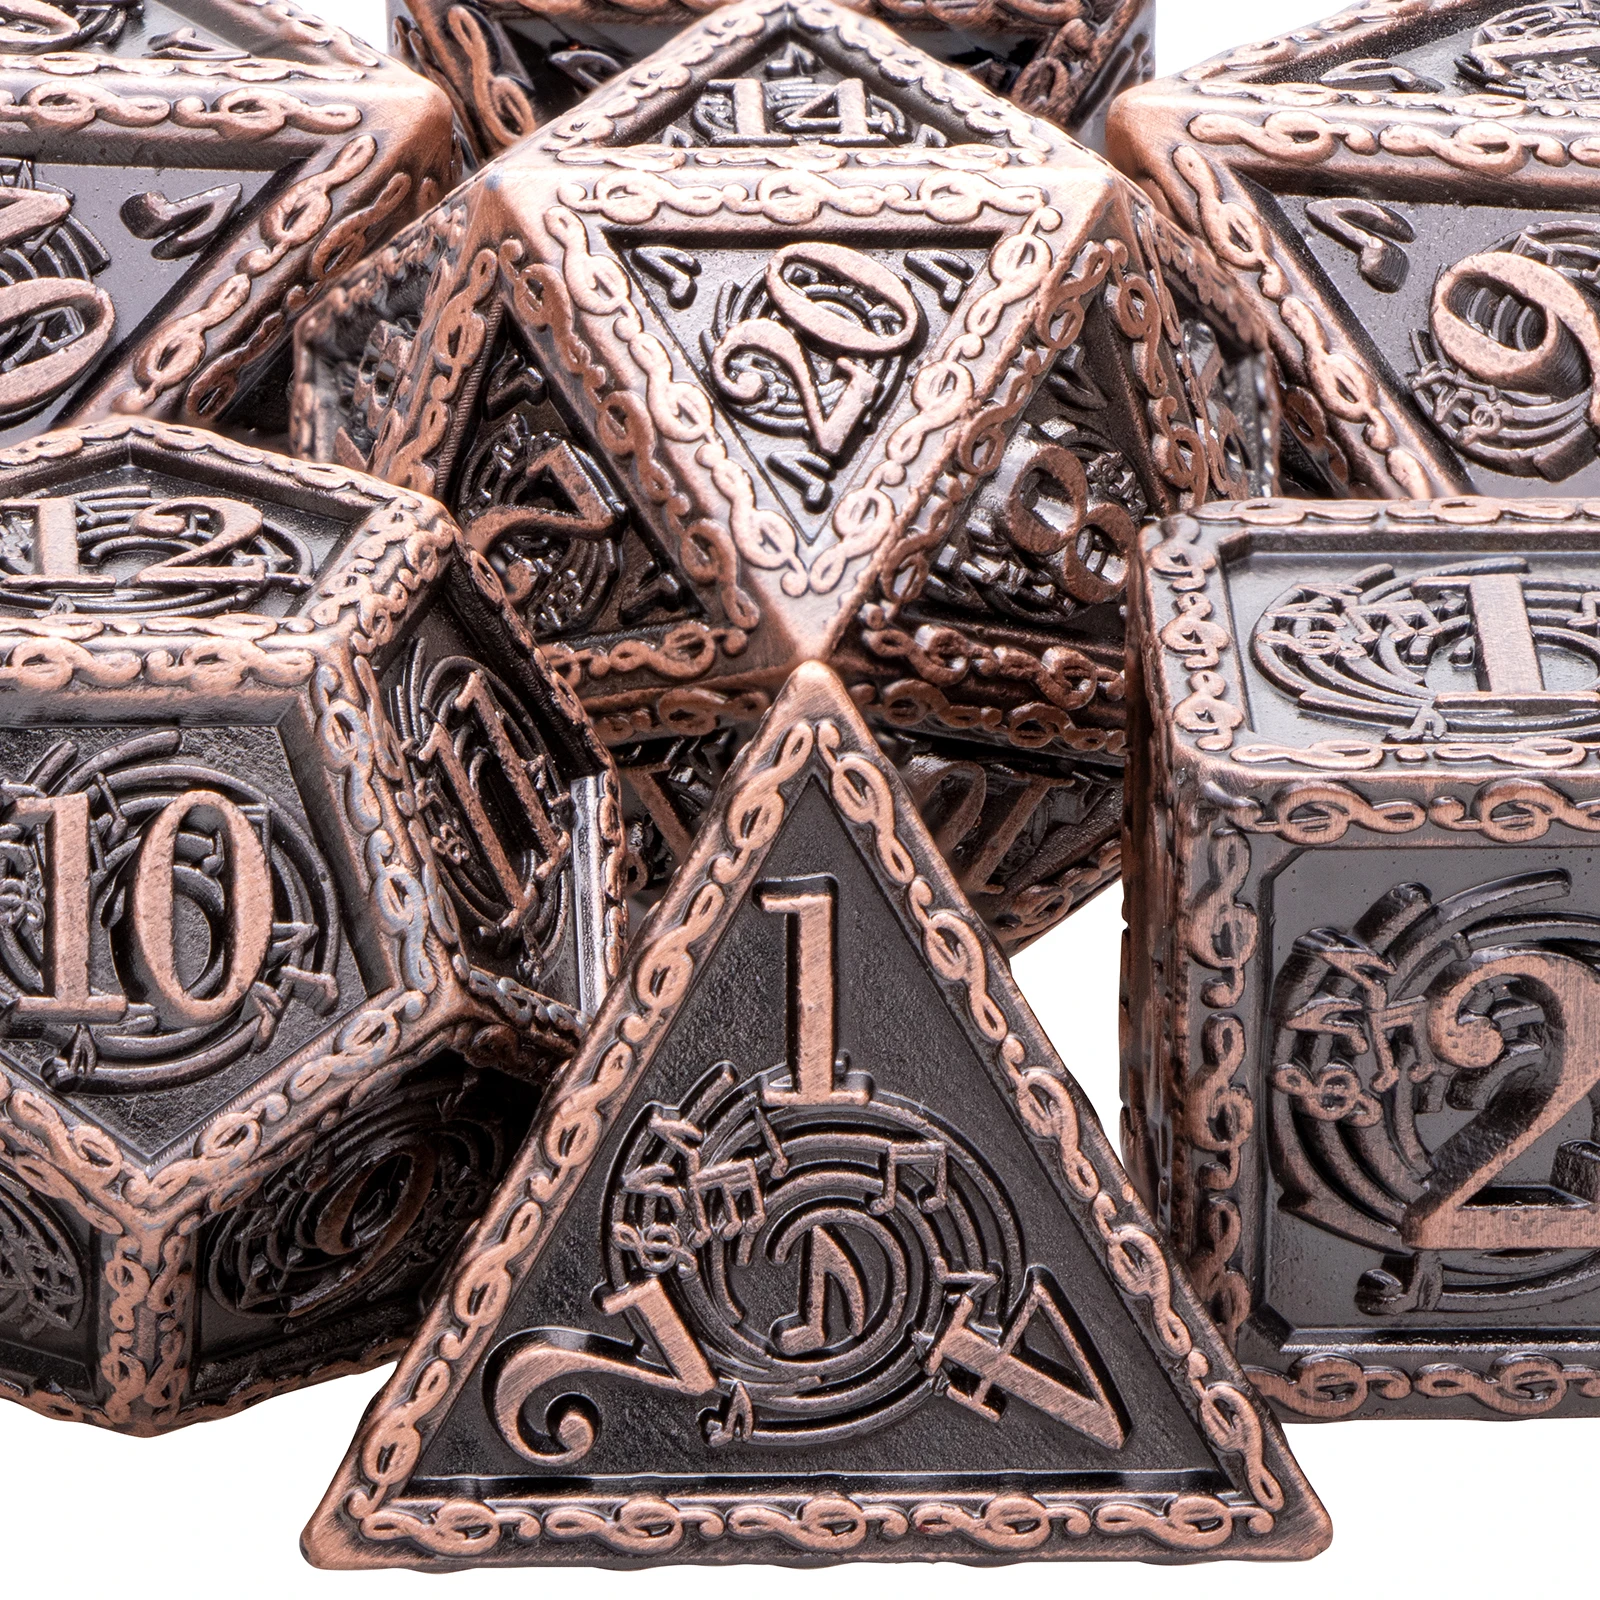 

7PCS Metal Polyhedral Music DND D20 Dice Set Role Playing D&D Dice Set for Dungeon and Dragon RPG D20 D12 D10 D8 D6 D4